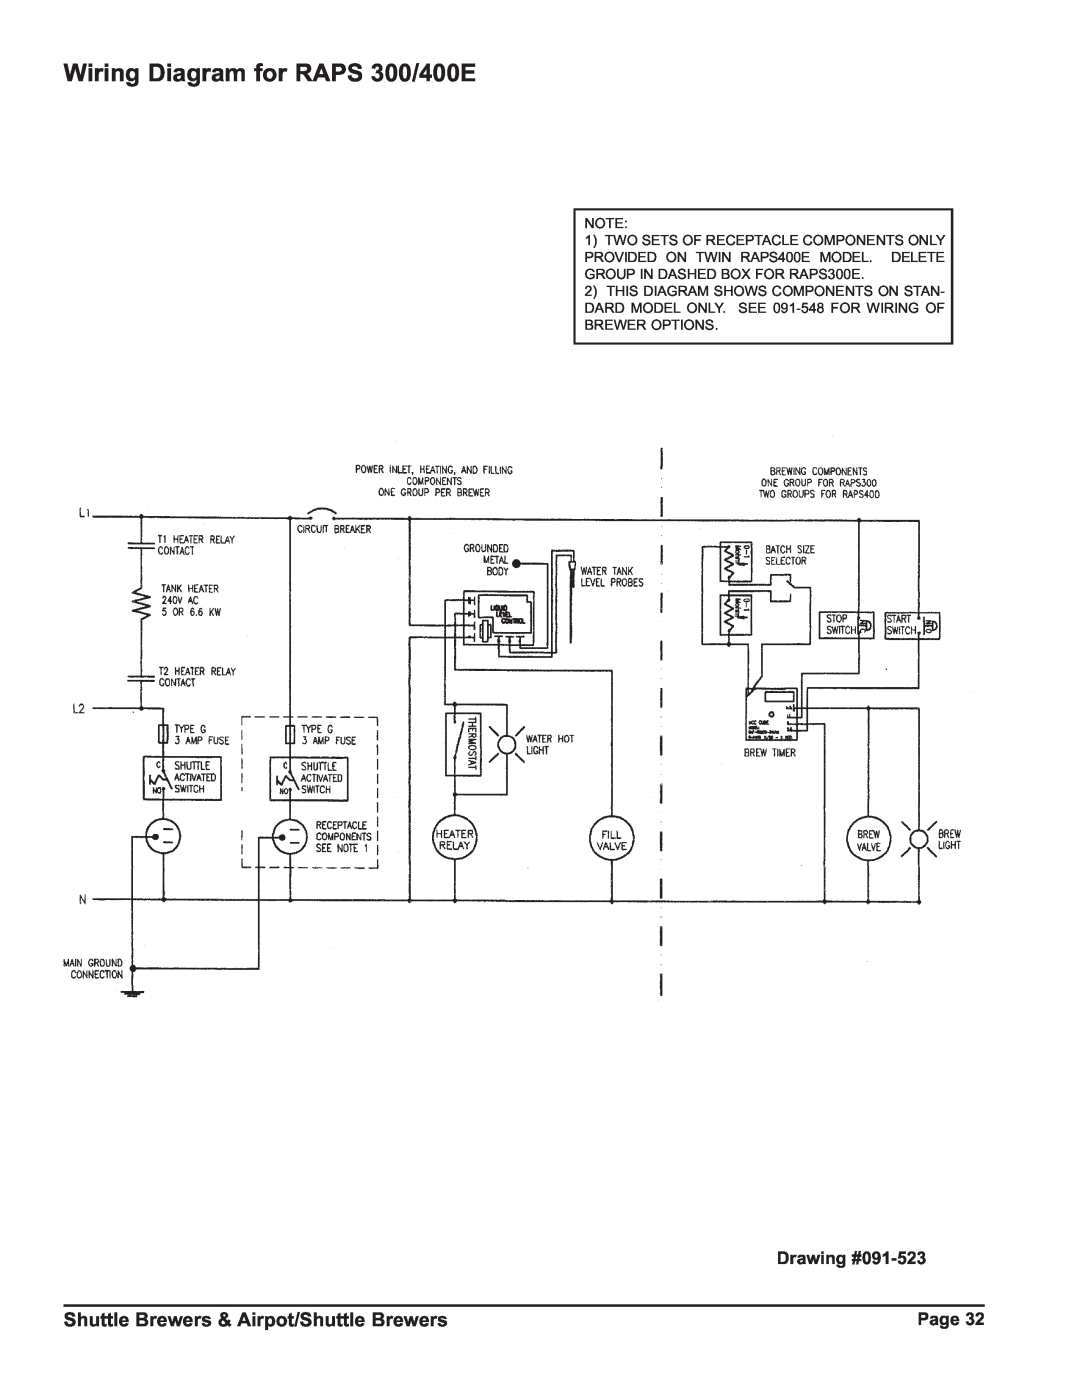 Grindmaster P400ESHP instruction manual Wiring Diagram for RAPS 300/400E, Shuttle Brewers & Airpot/Shuttle Brewers 